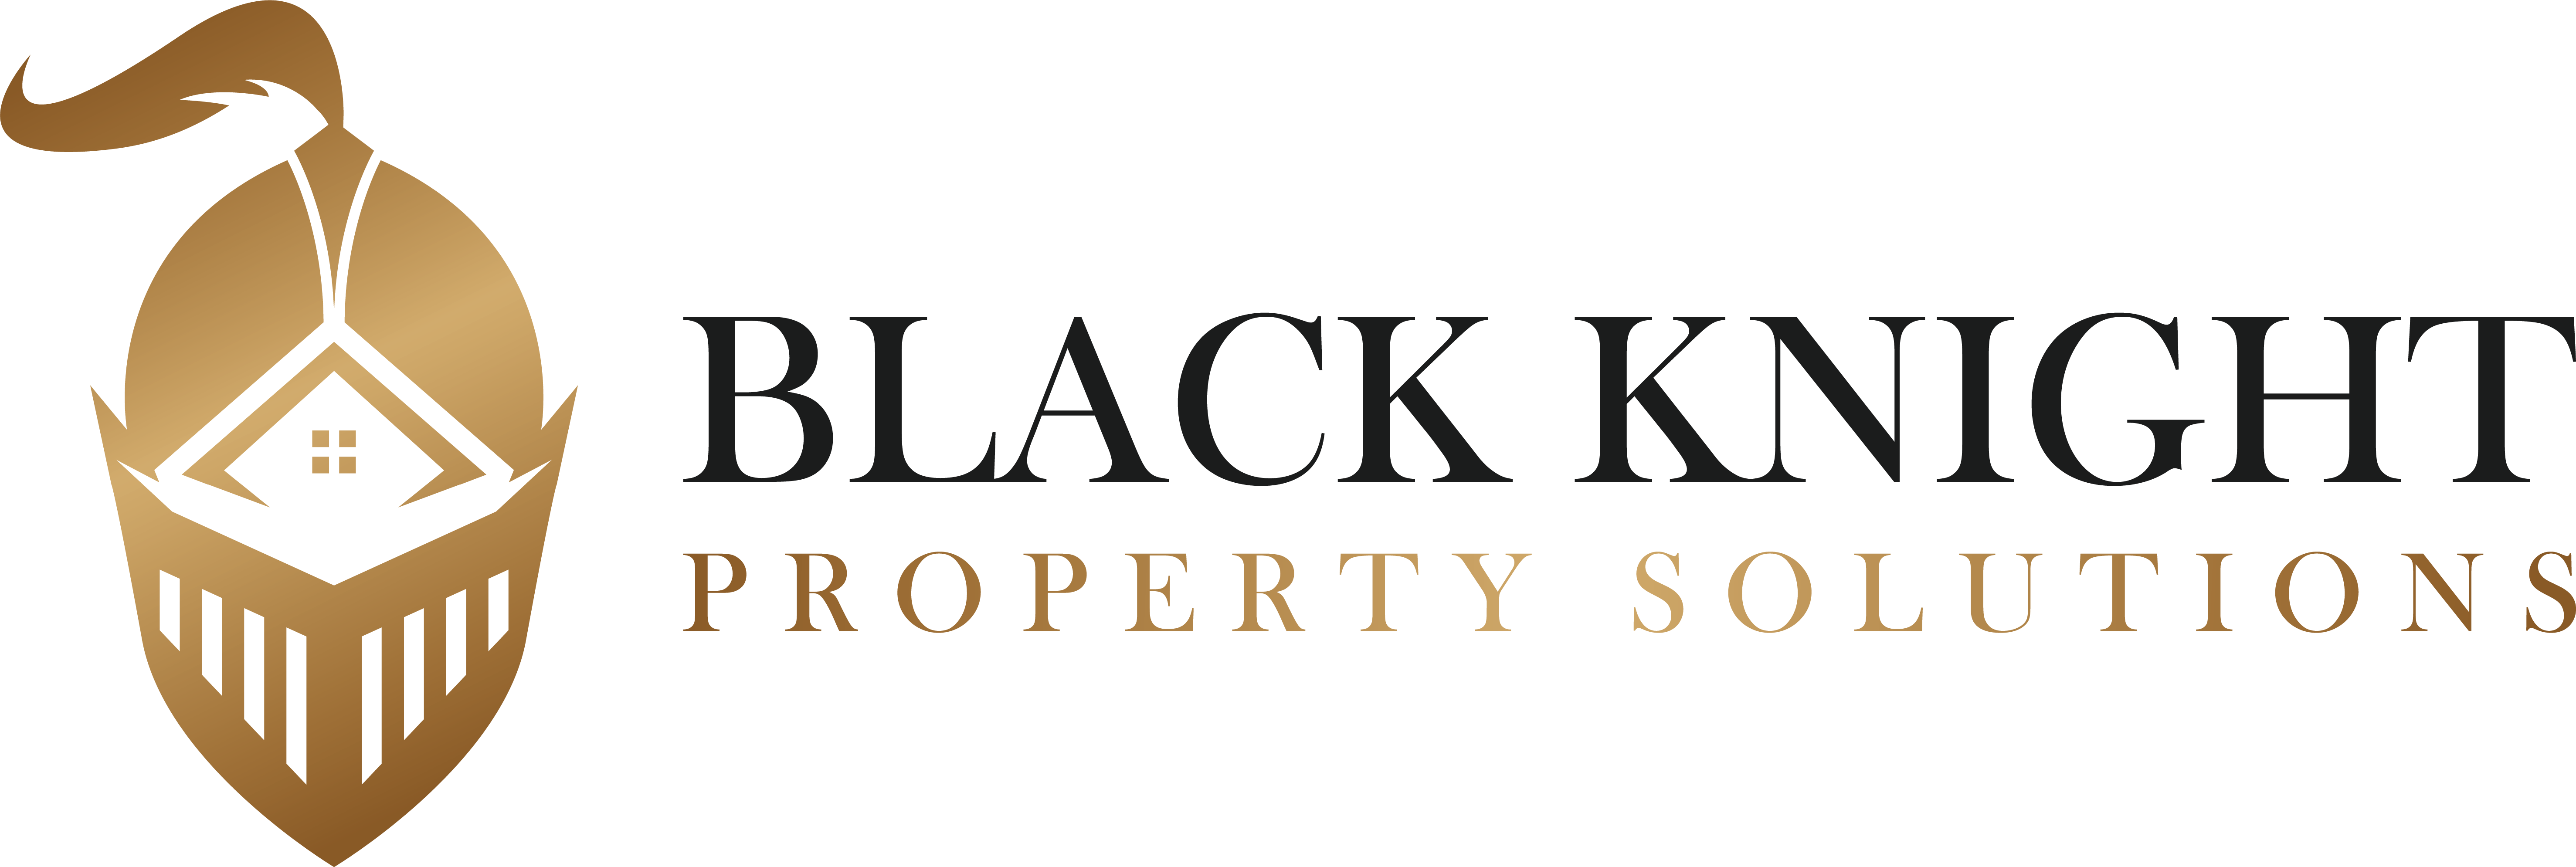 Black Knight Property Solutions Explains Qualities of a Top Cash Home Buyer